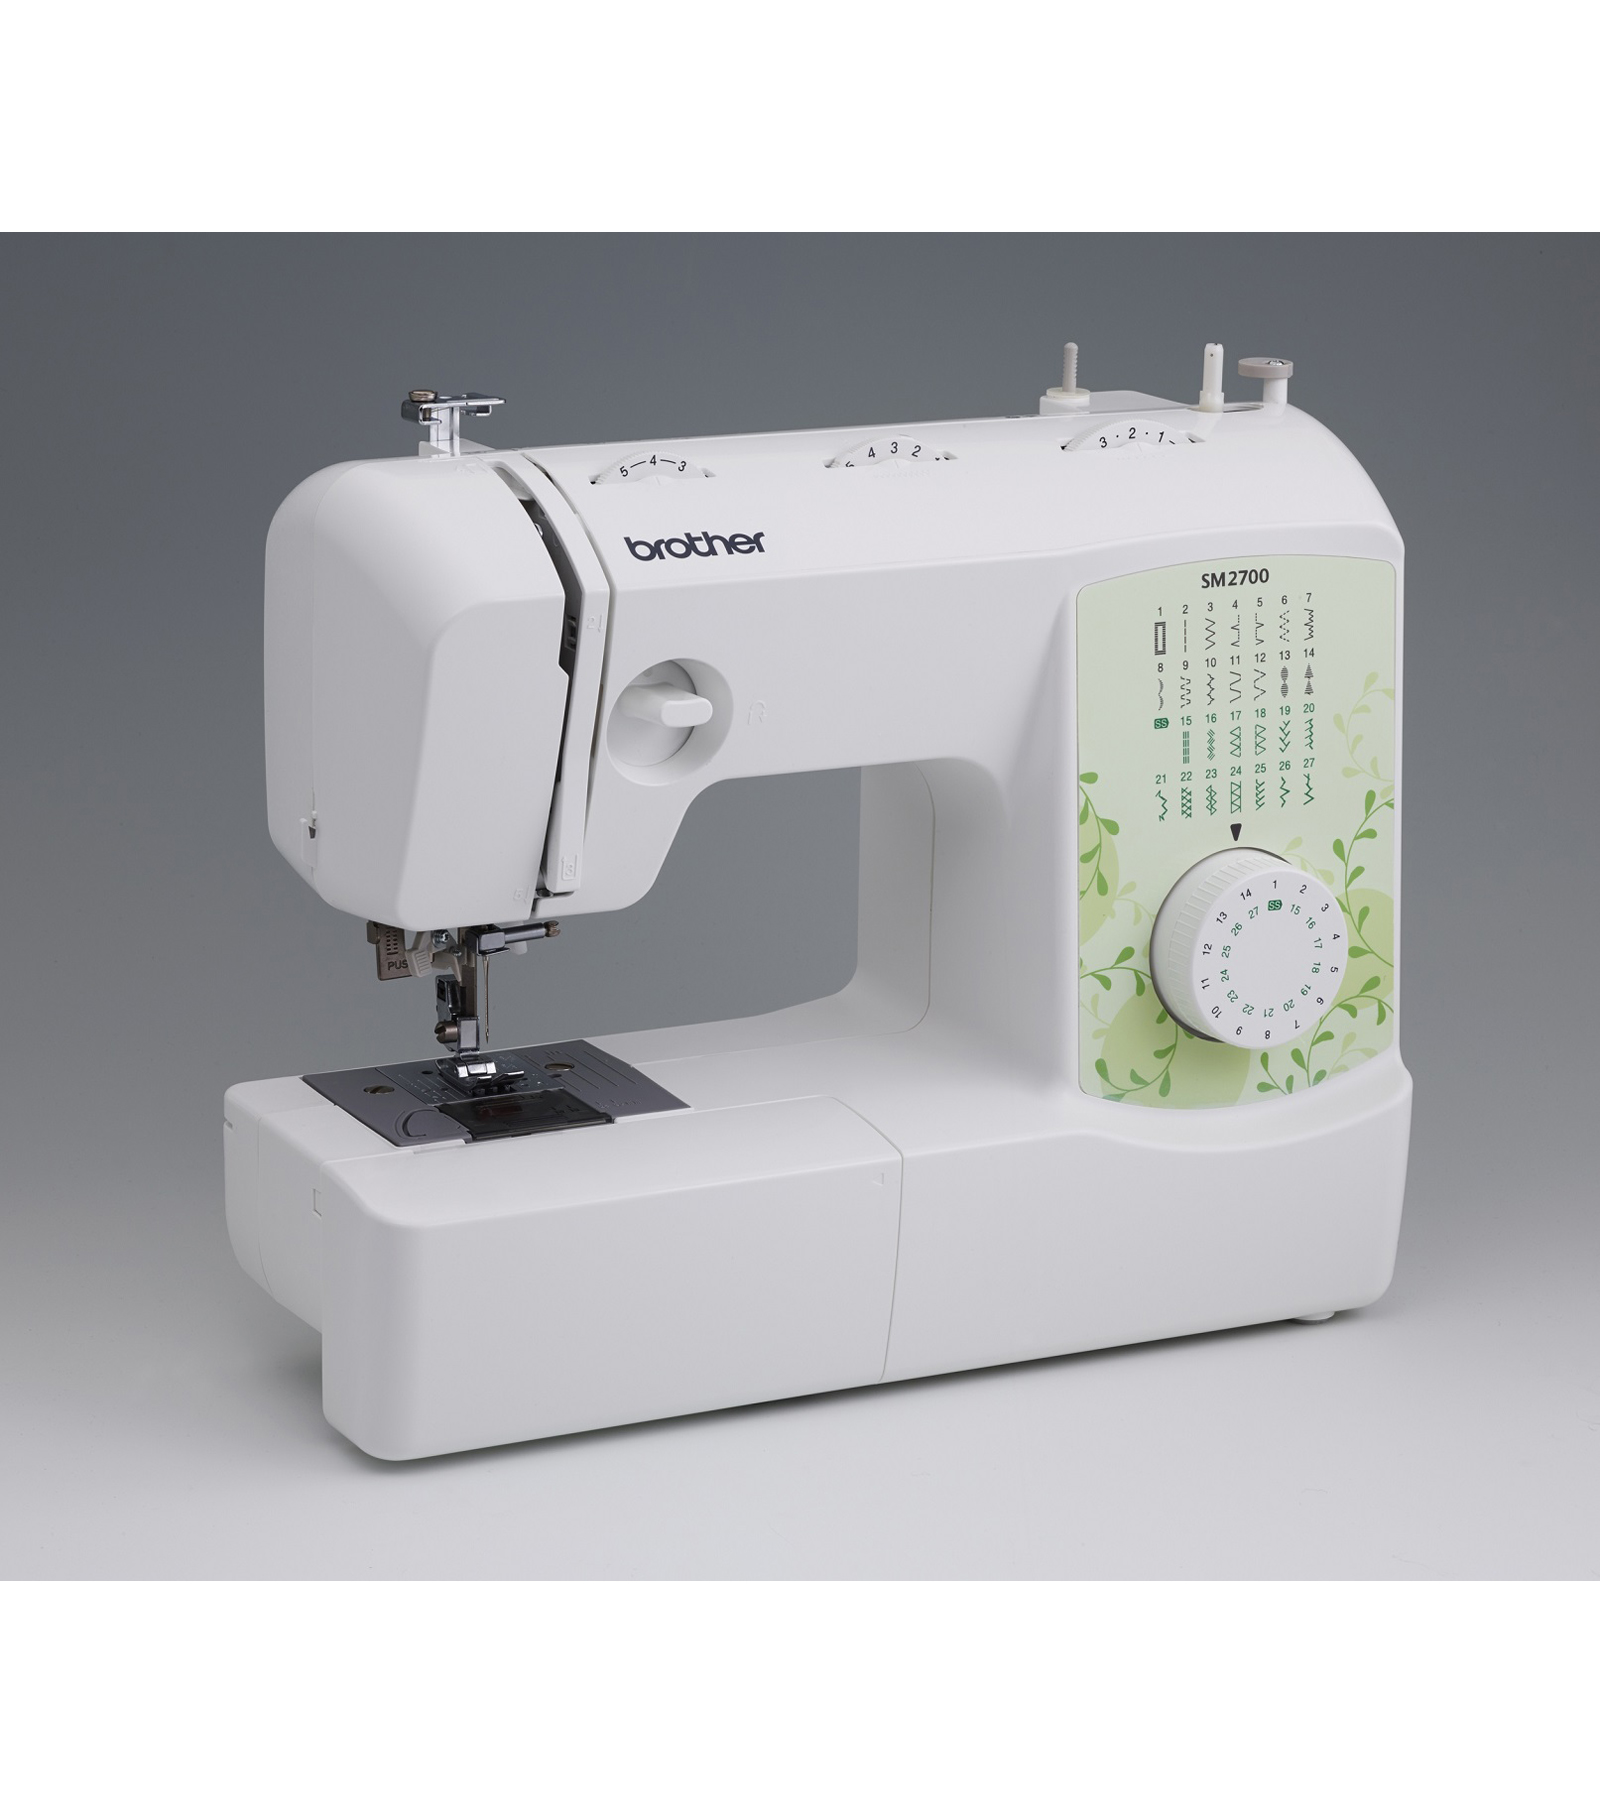 Brother SM2700 - Brother Sewing Machine | JOANN